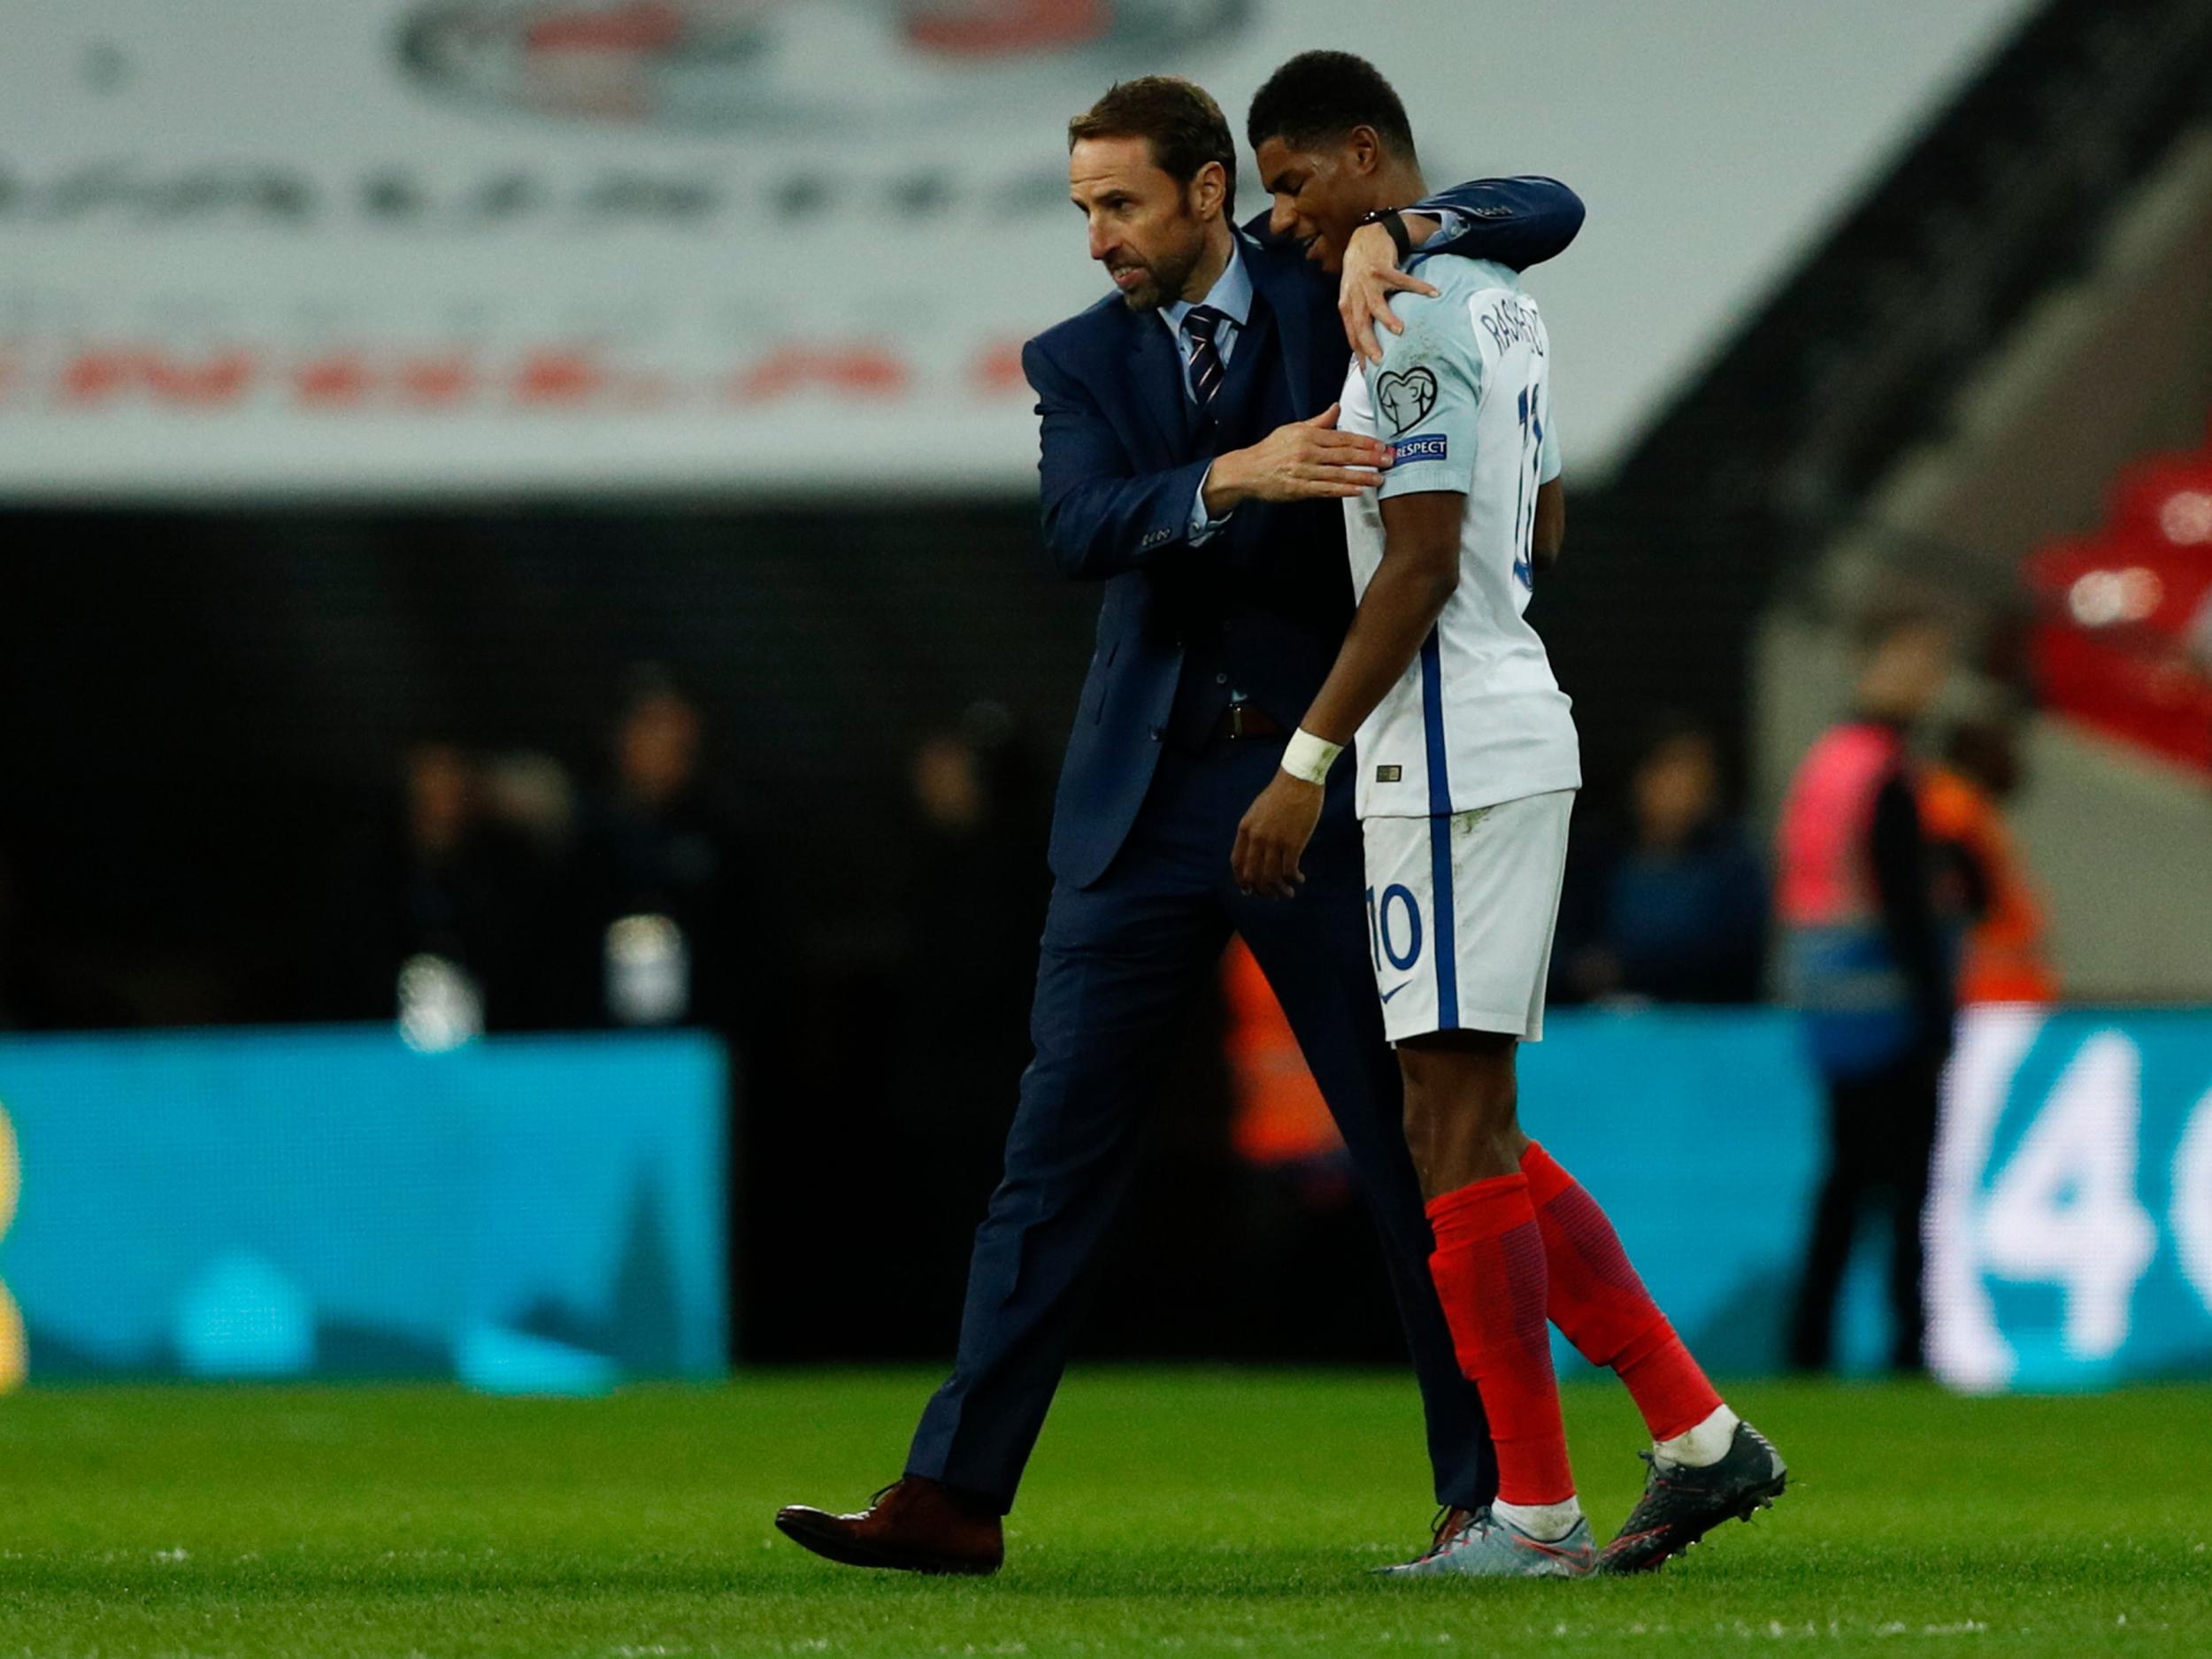 Southgate knows more work needs to be done before next summer